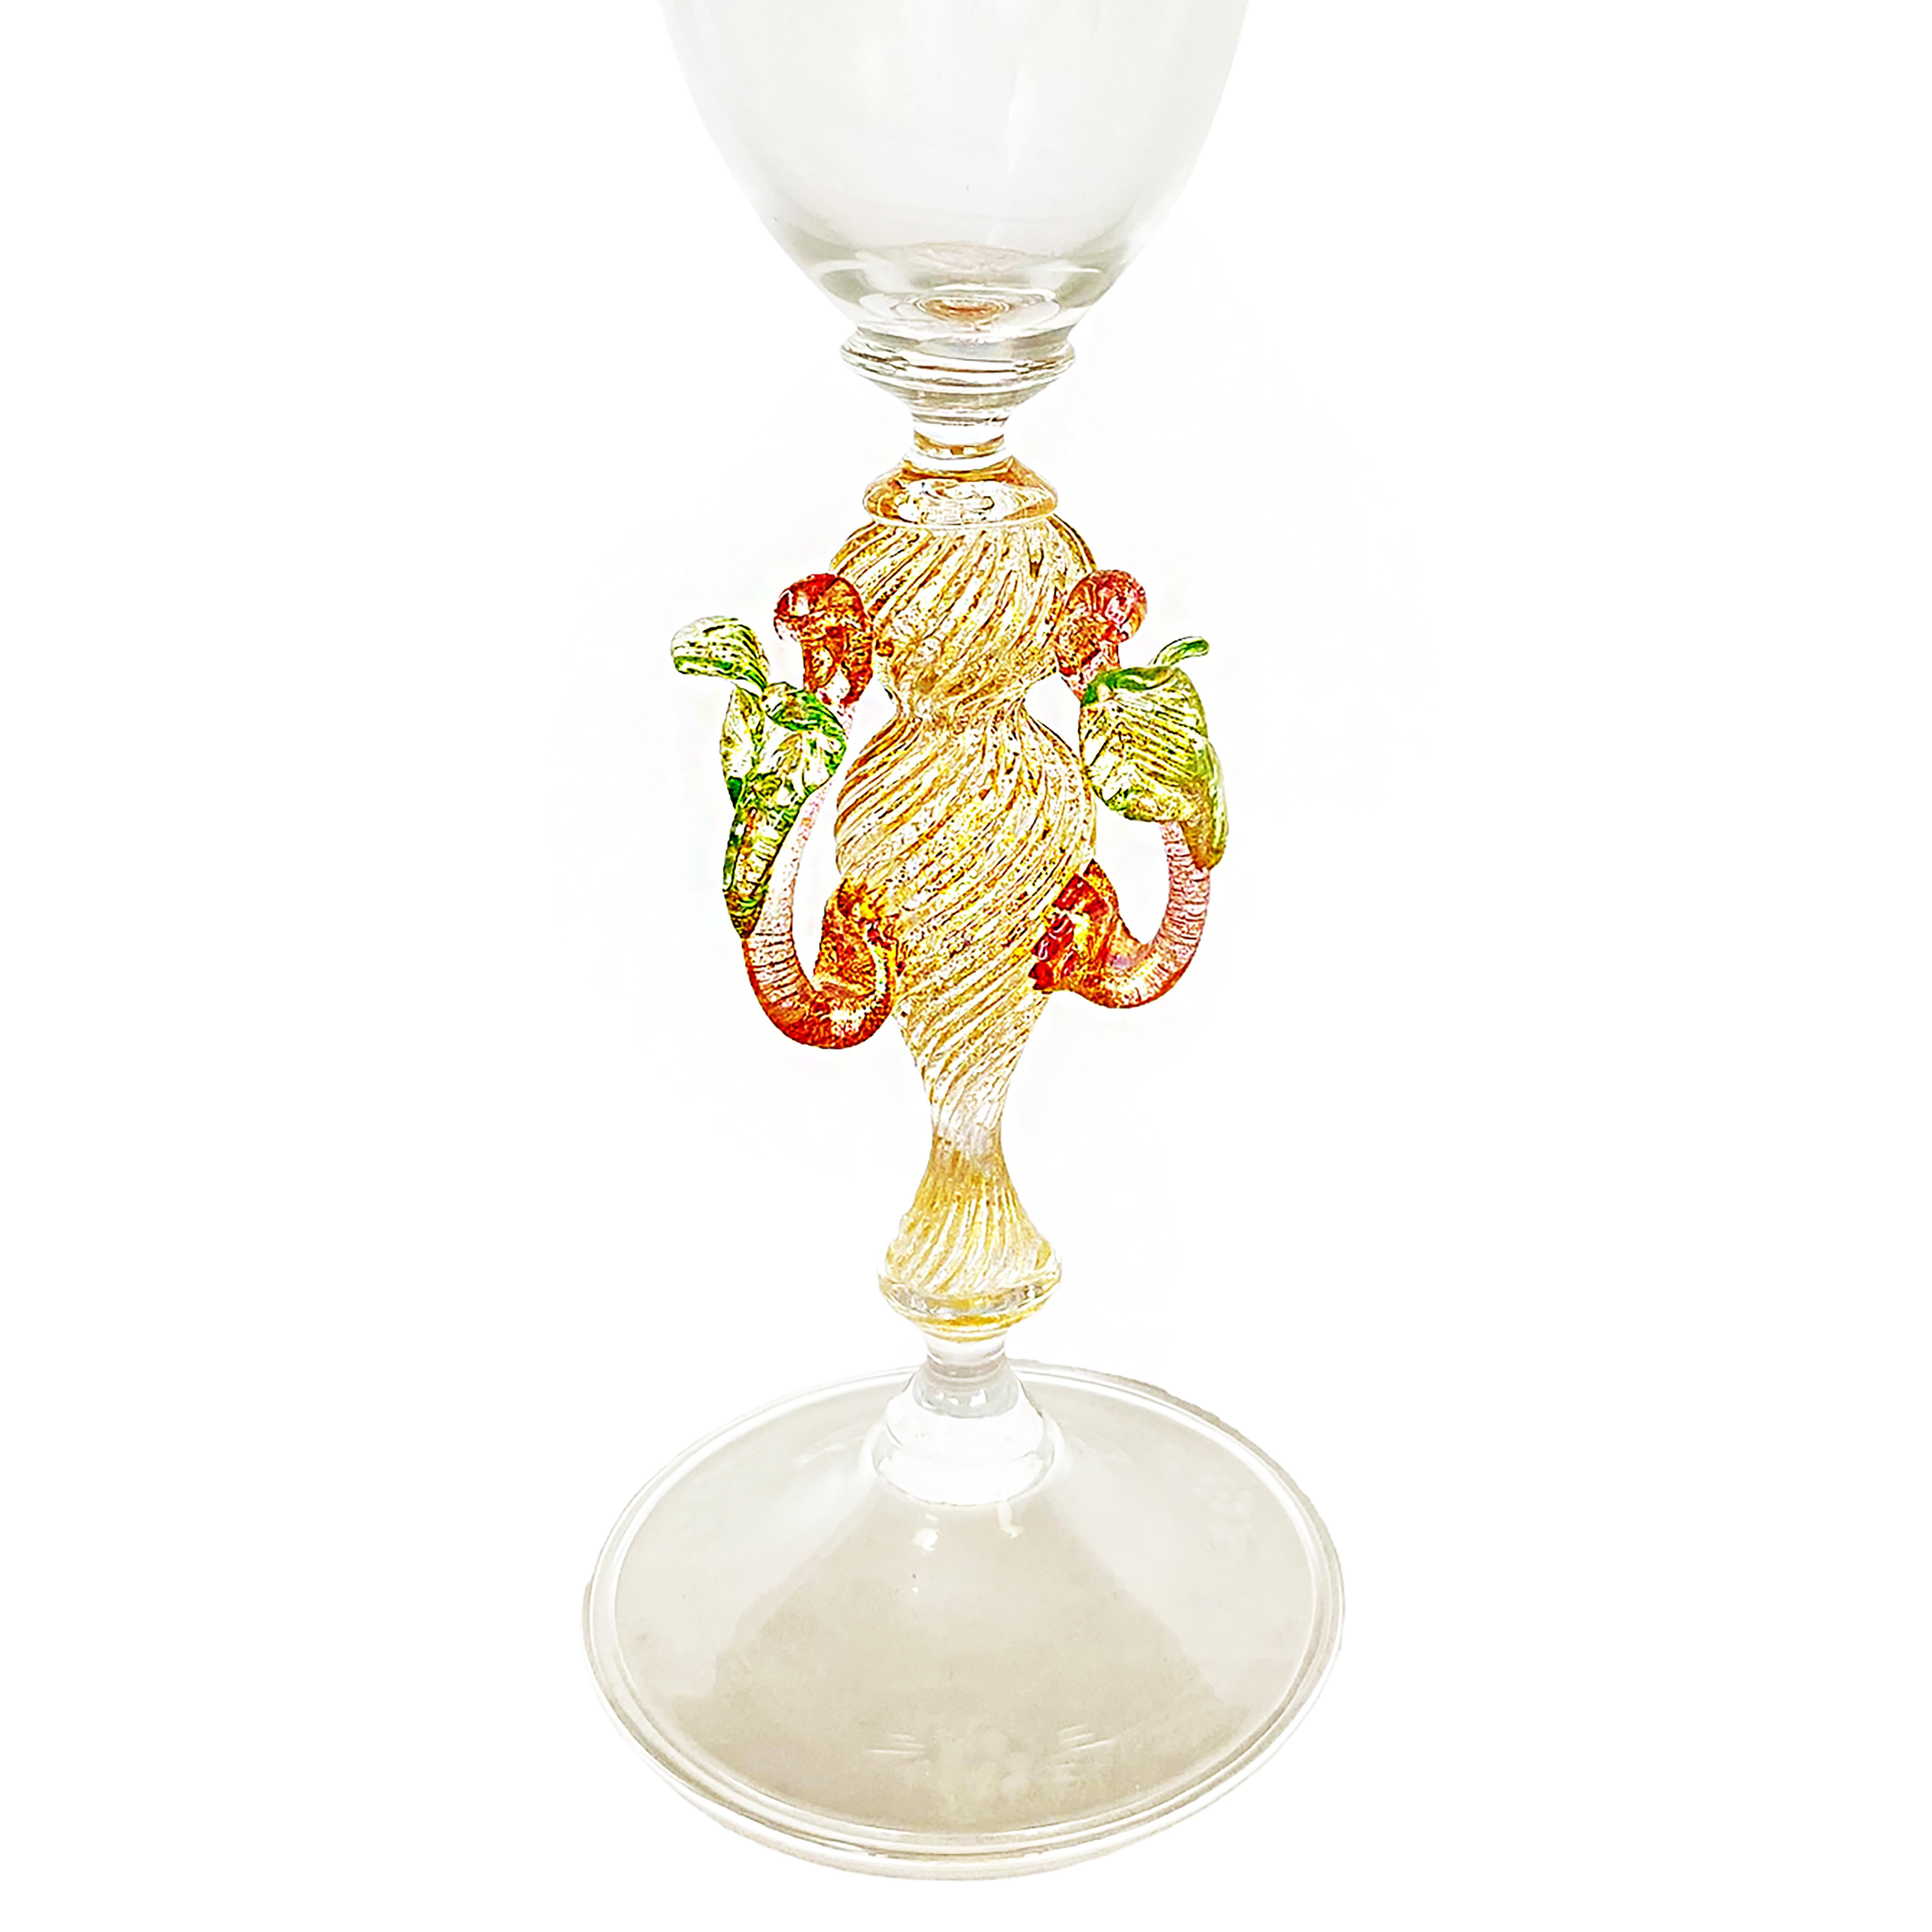 Delicately etched goblet and base.
From Italy. Handmade and signed by Murano master glassmaker.
We have 15 of these gorgeous, highly-collectible art objects. All different, all one-of-a-kind. 
We will be listing all 15. Most have different